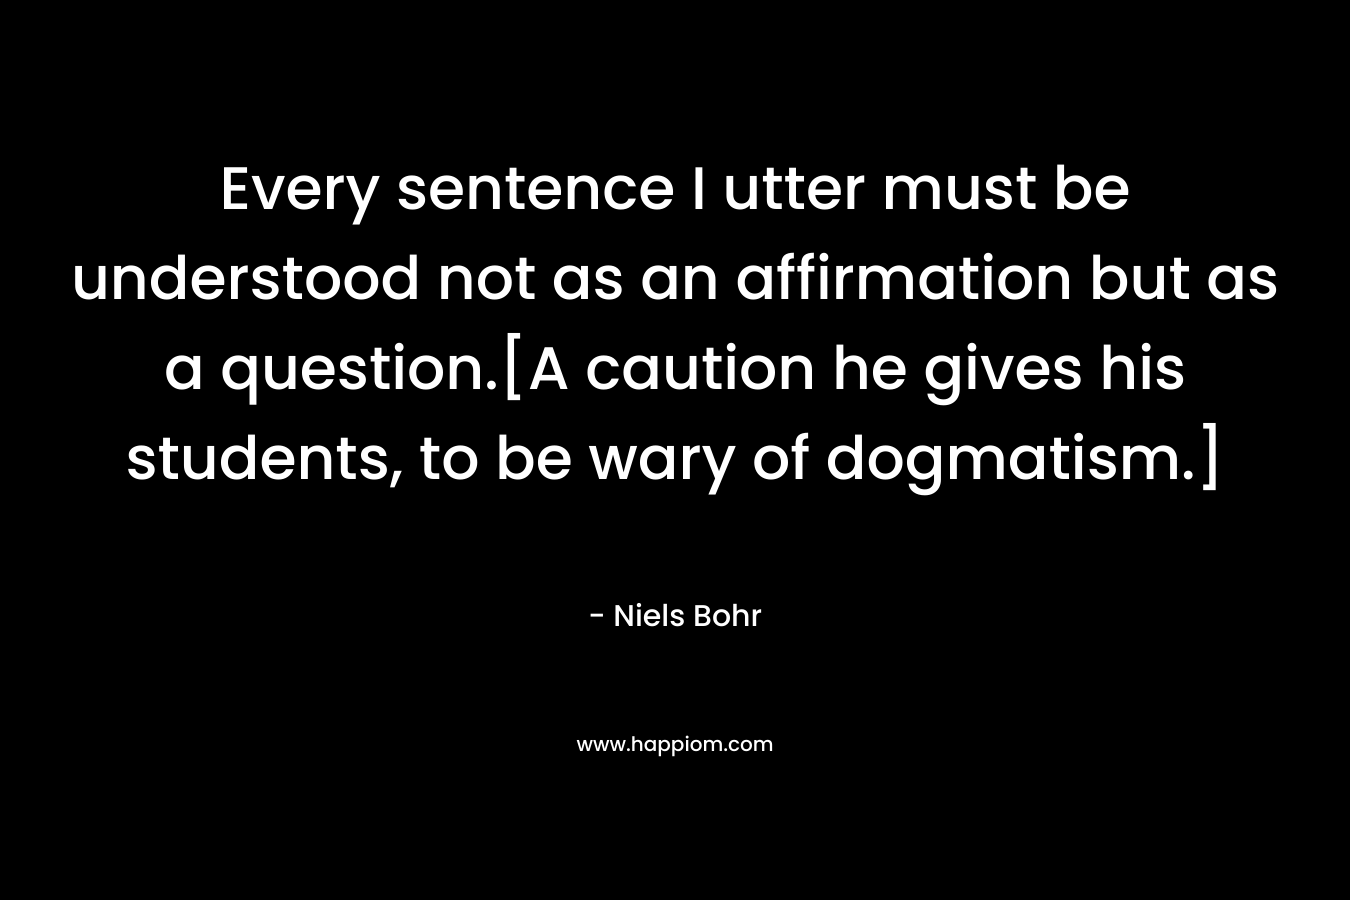 Every sentence I utter must be understood not as an affirmation but as a question.[A caution he gives his students, to be wary of dogmatism.] – Niels Bohr